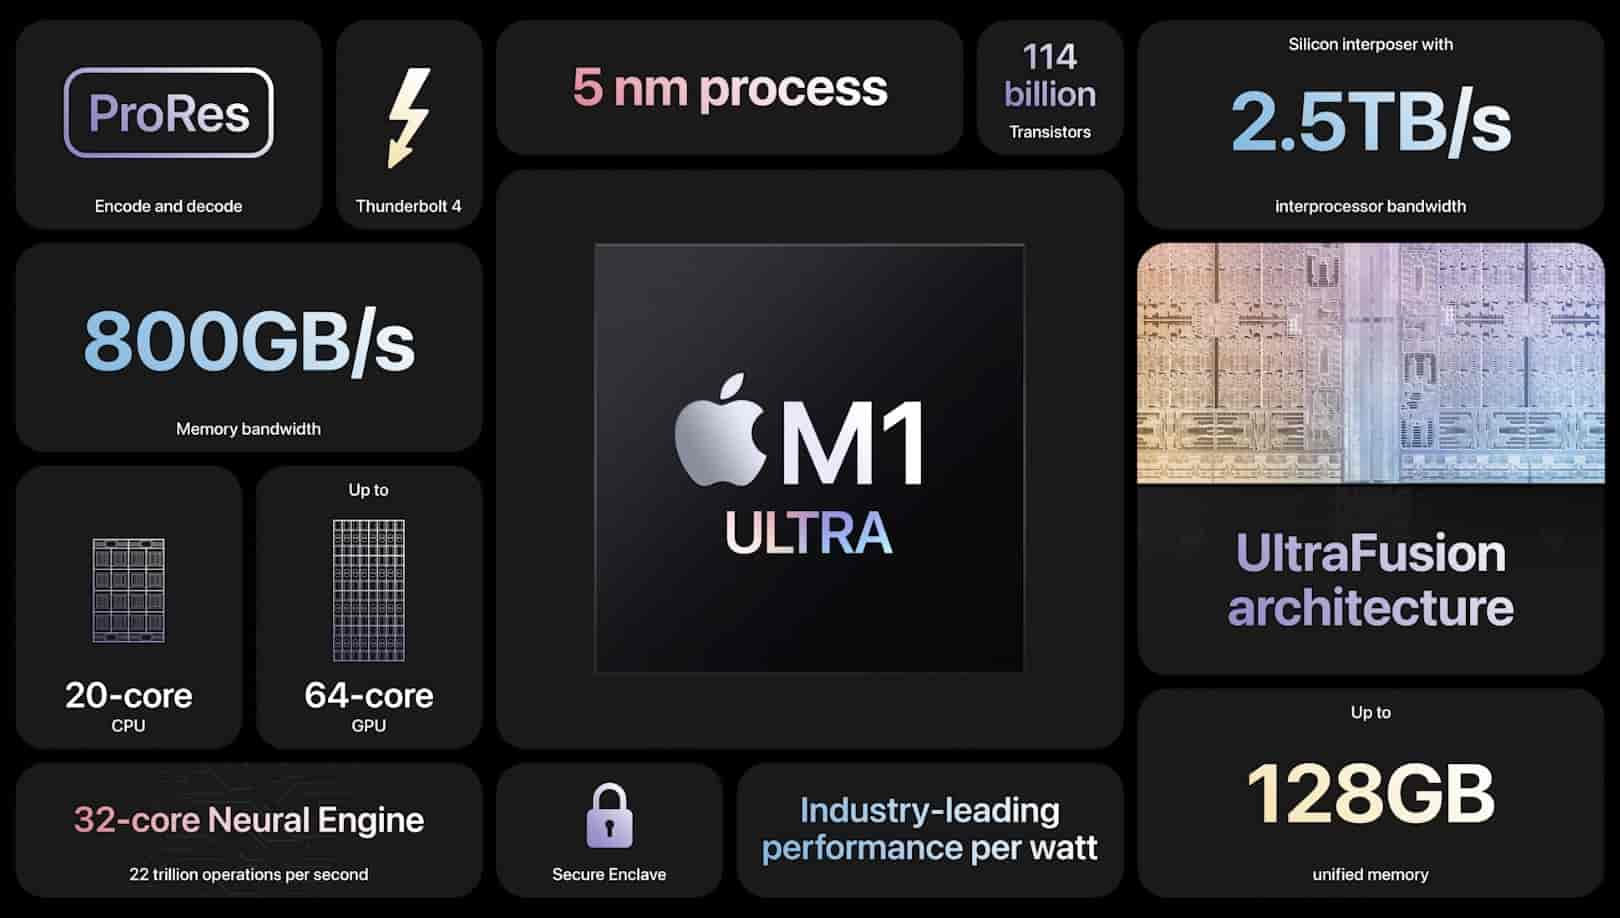 Today, Apple announced the M1 Ultra chip, which has 128GB of storage. It represents the company’s next “breakthrough”